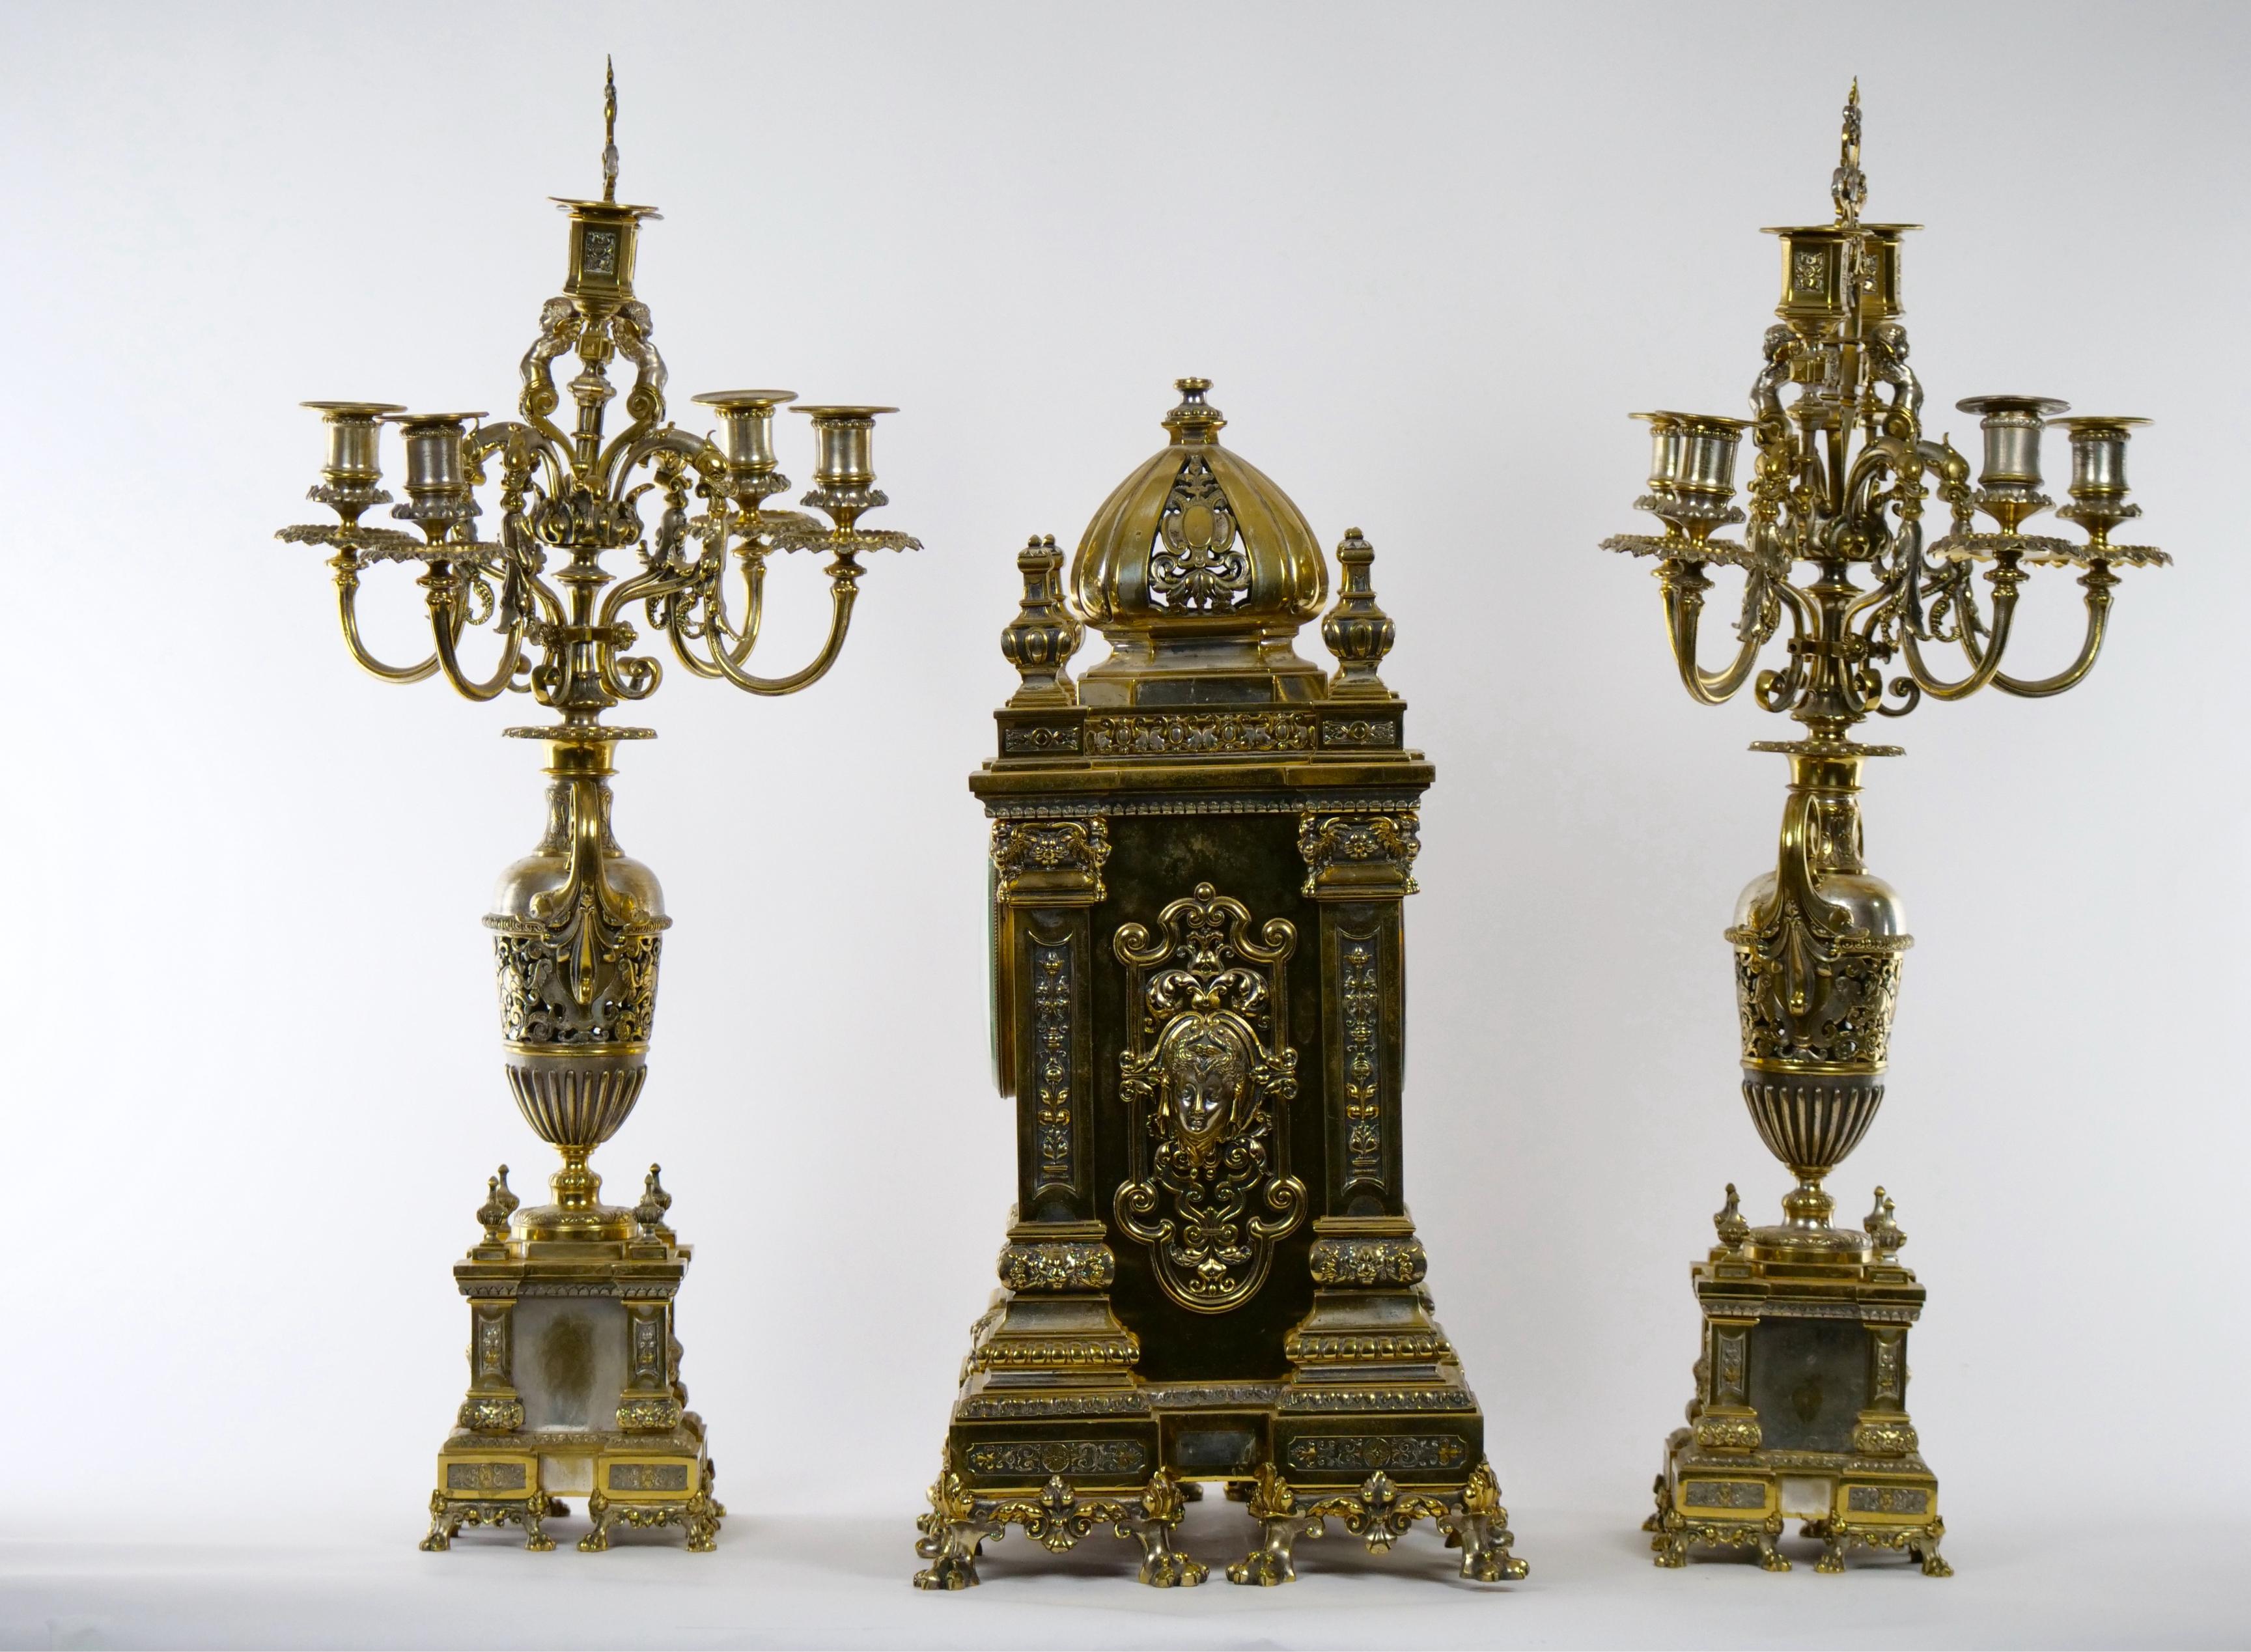 Great craftsmanship French gilt bronze and silvered brass three piece clock garniture from the mid 19th century. The set include a French ebauche clock 8-day brass time and strike movement. Signed by the maker's and dial marked by the retailer 